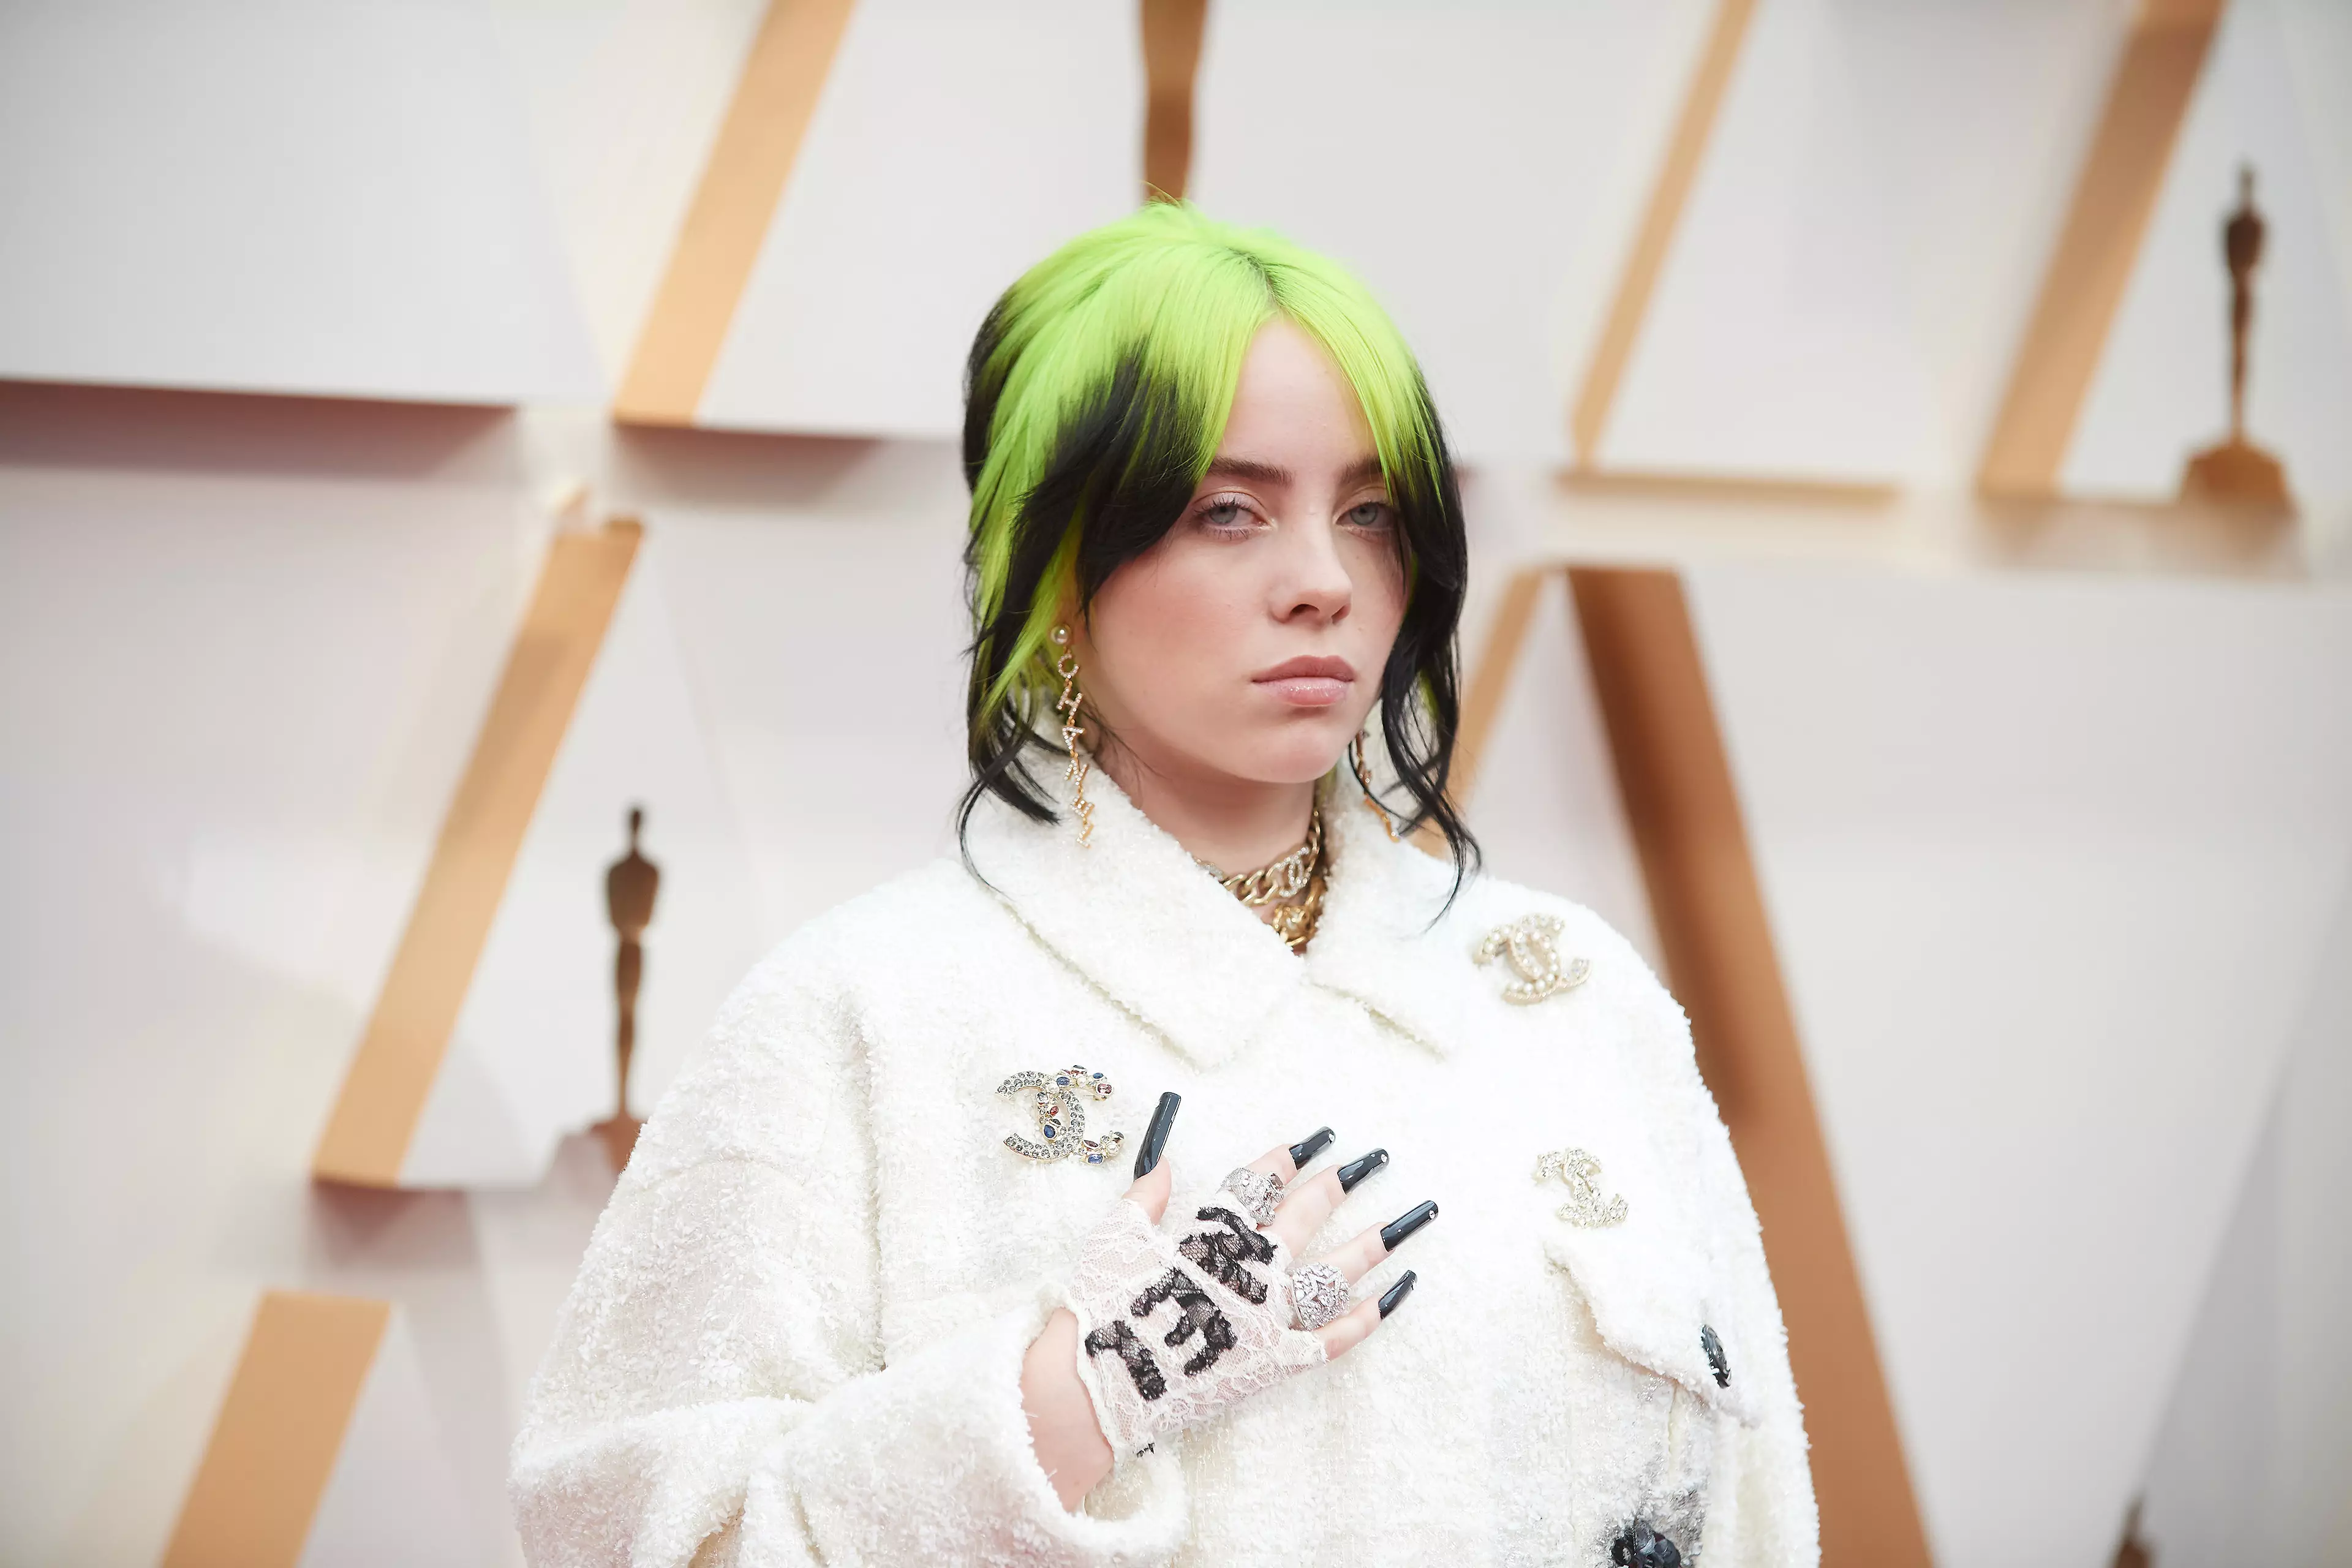 Billie Eilish has criticised body shaming in a video as part of her new world tour.